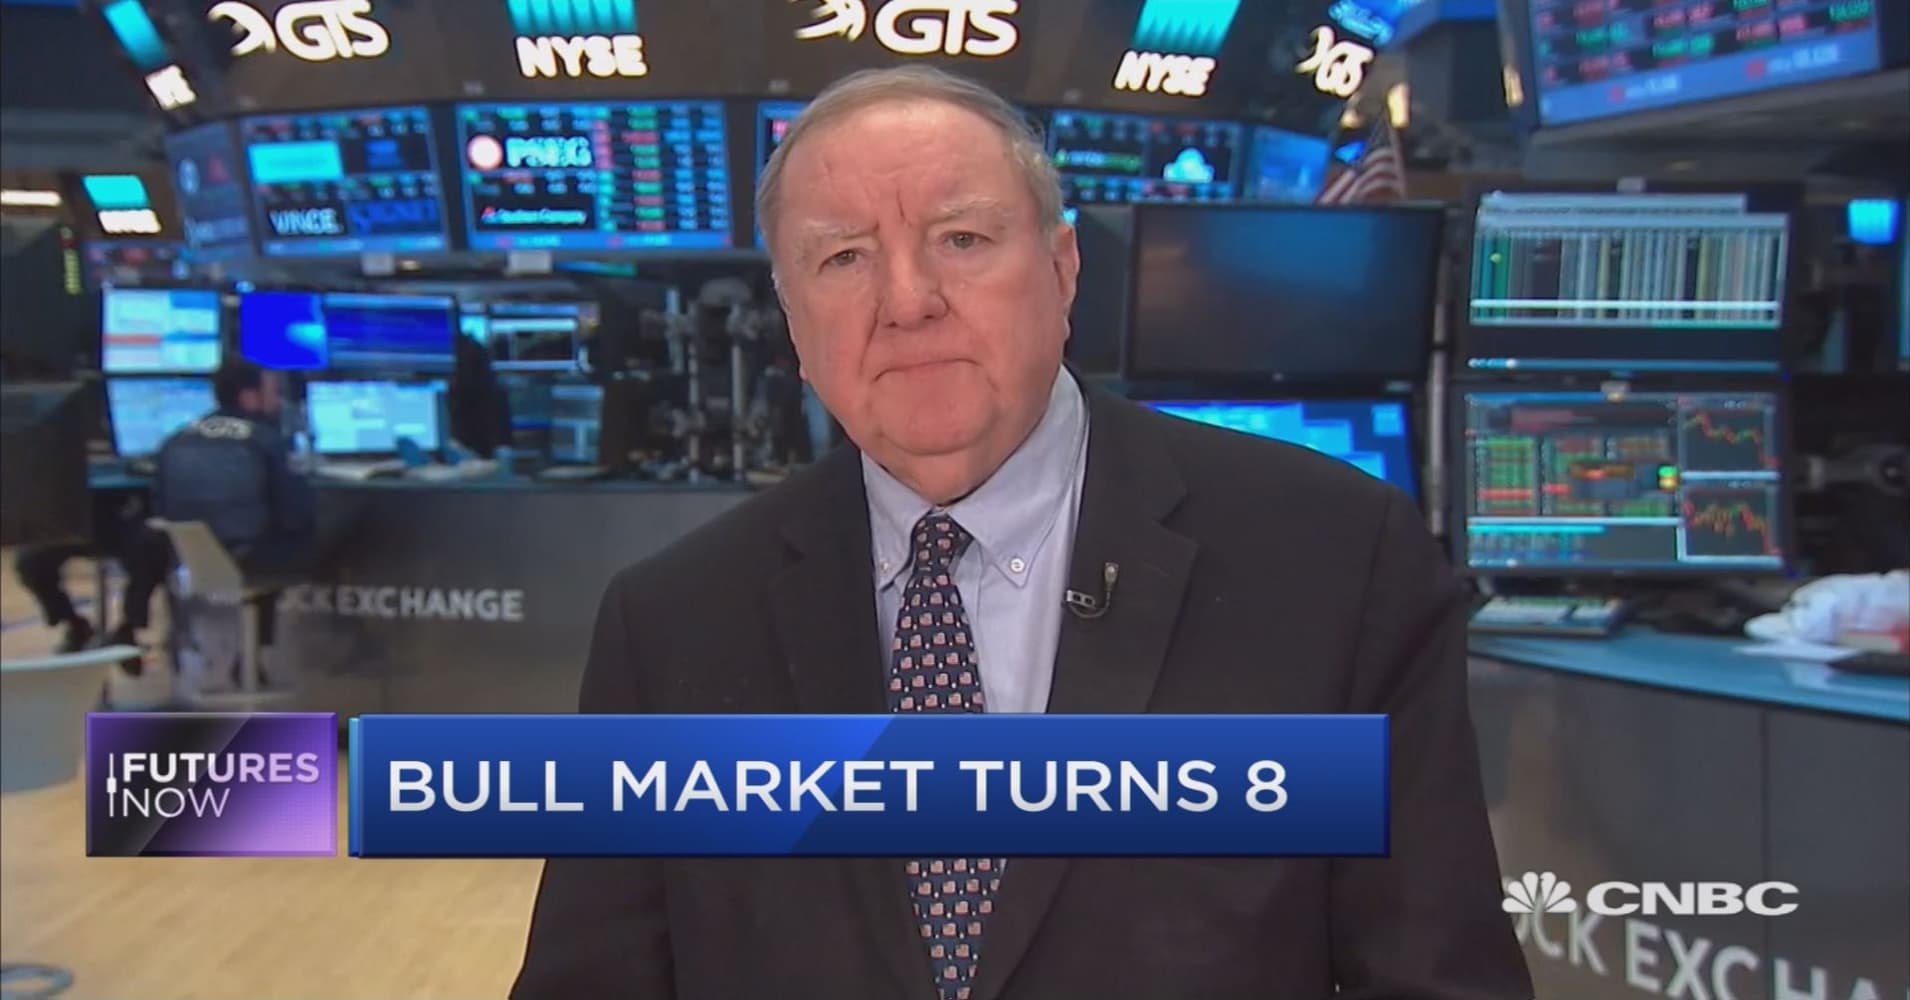 What are CNBC pre-market futures?